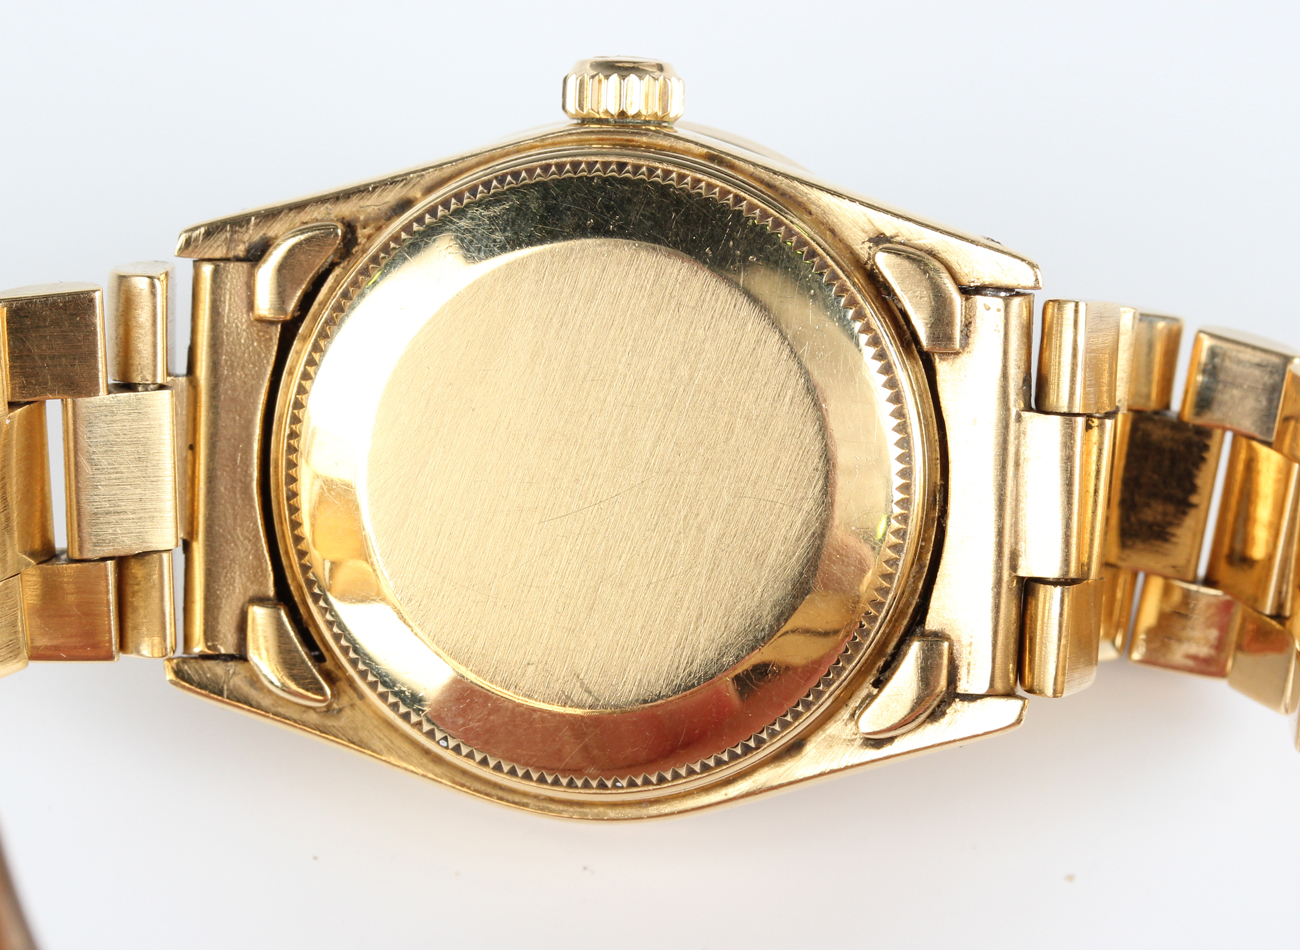 A Rolex Oyster Perpetual Datejust 18ct gold lady's bracelet wristwatch, Ref. No. 6827, circa 1981, - Image 10 of 11